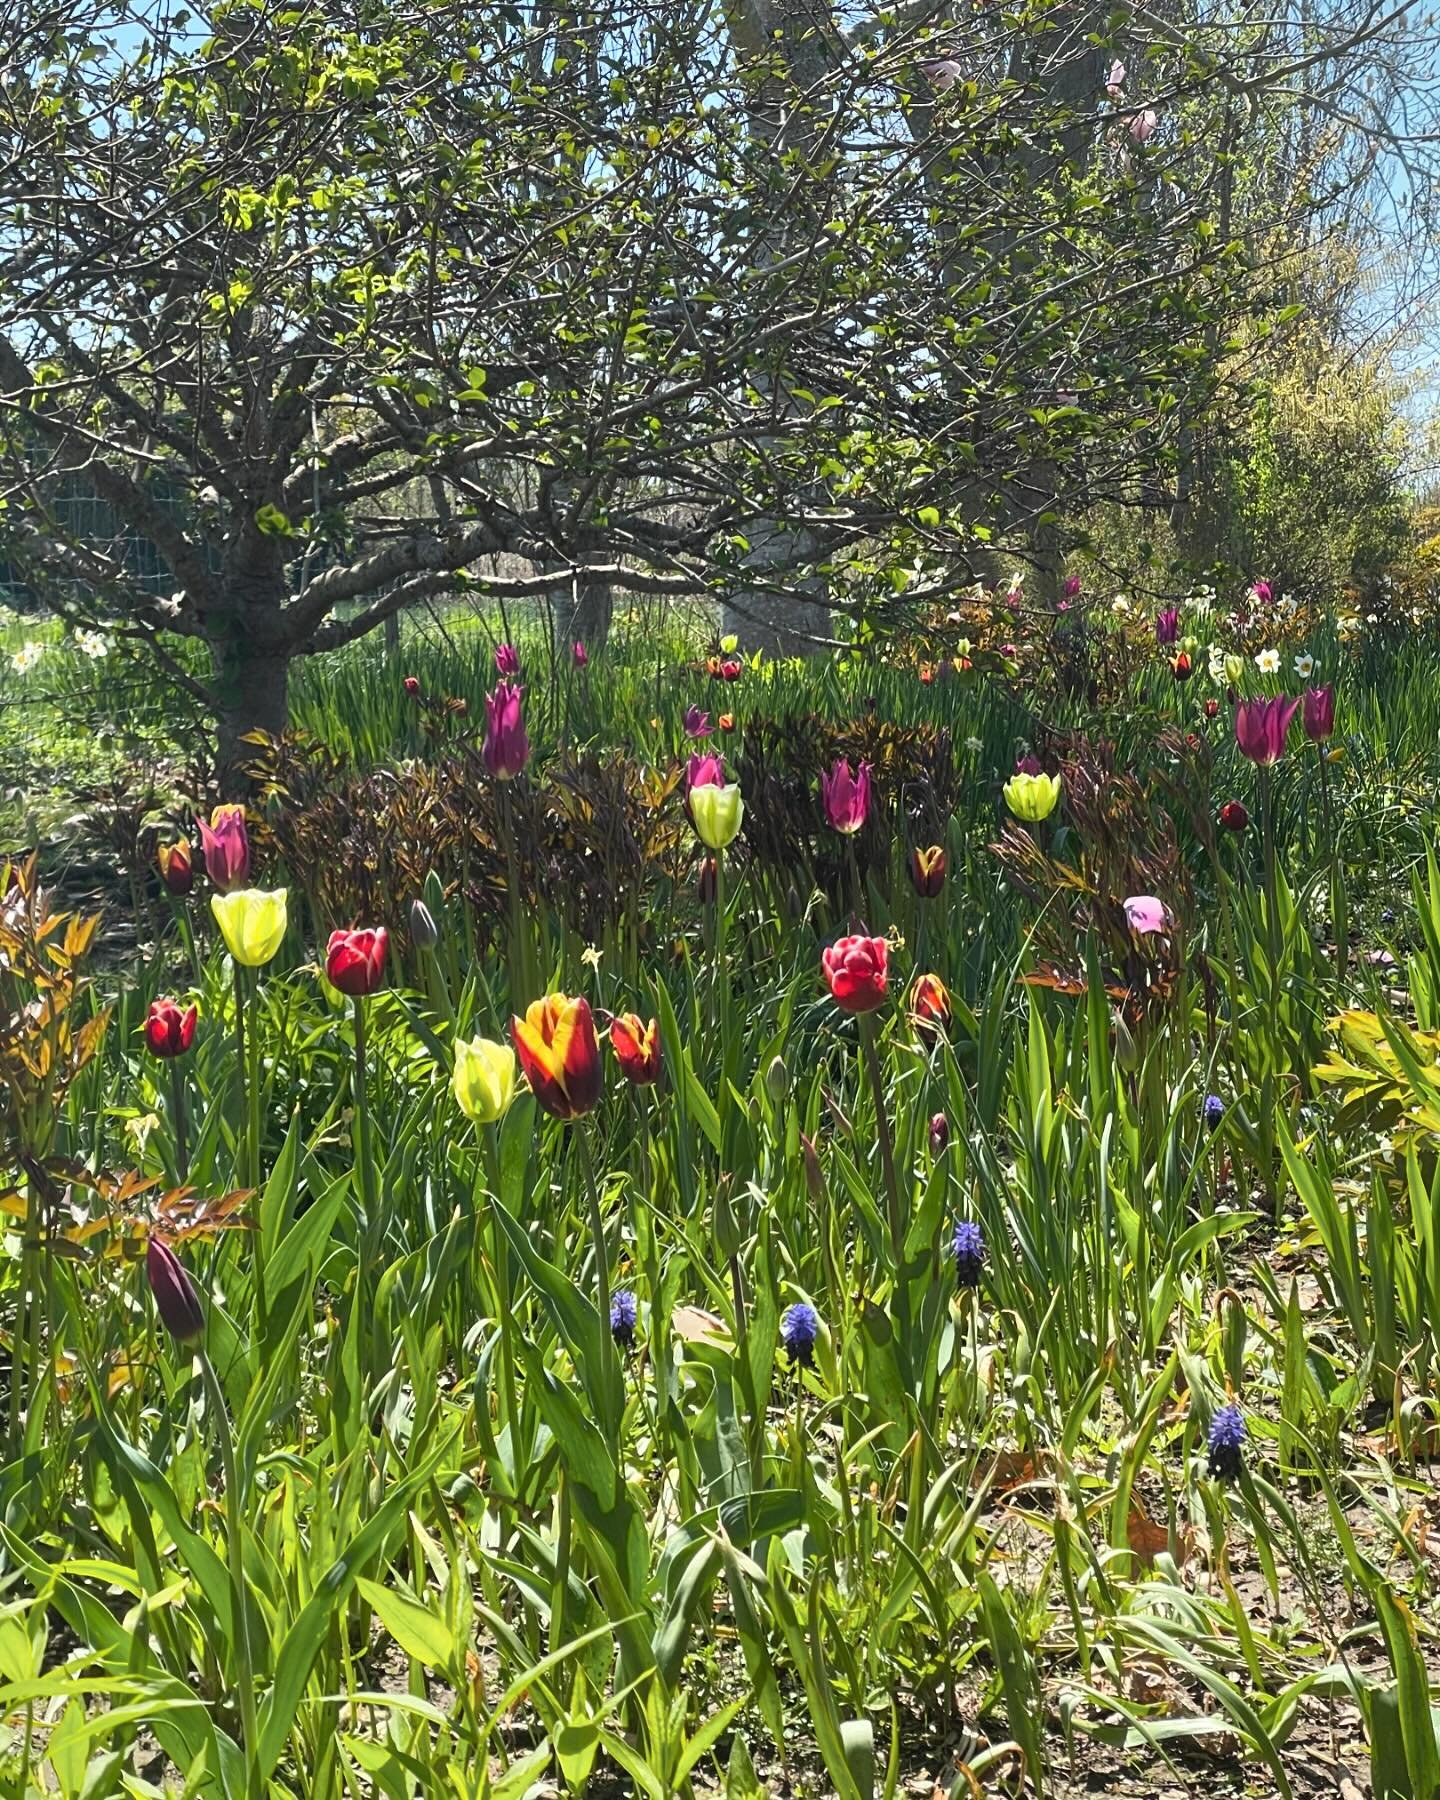 Don&rsquo;t miss the tulips in the long border at Madoo this weekend.  We&rsquo;re open Friday and Saturday from noon to 4:00 pm.  Please visit Madoo.org to make a reservation. #springatmadoo #tulips #longborder #tuin #garden #landscape #jardin #saga